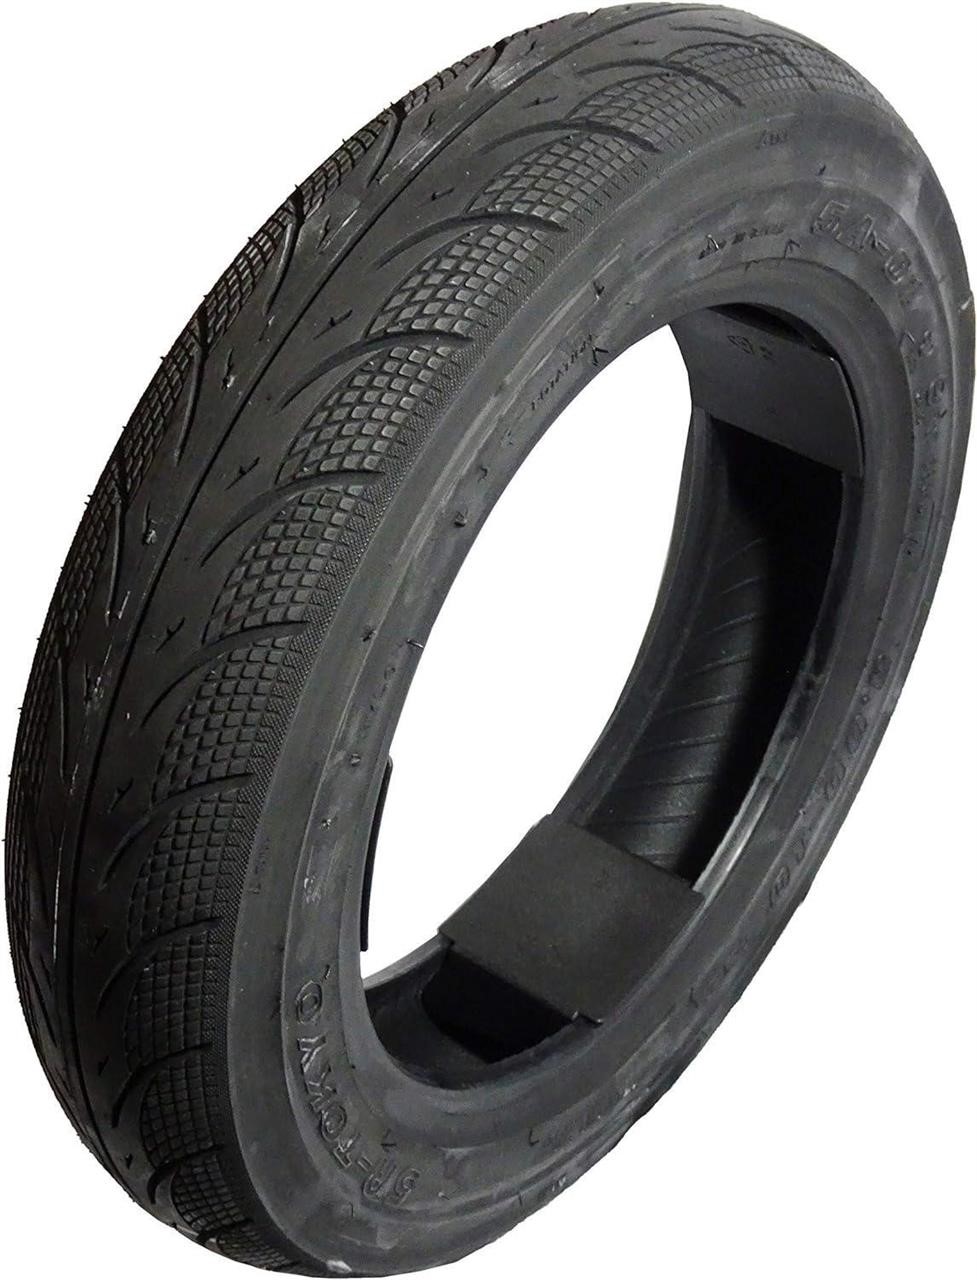 5A02 120/70-12 Scooter Tubeless Tire